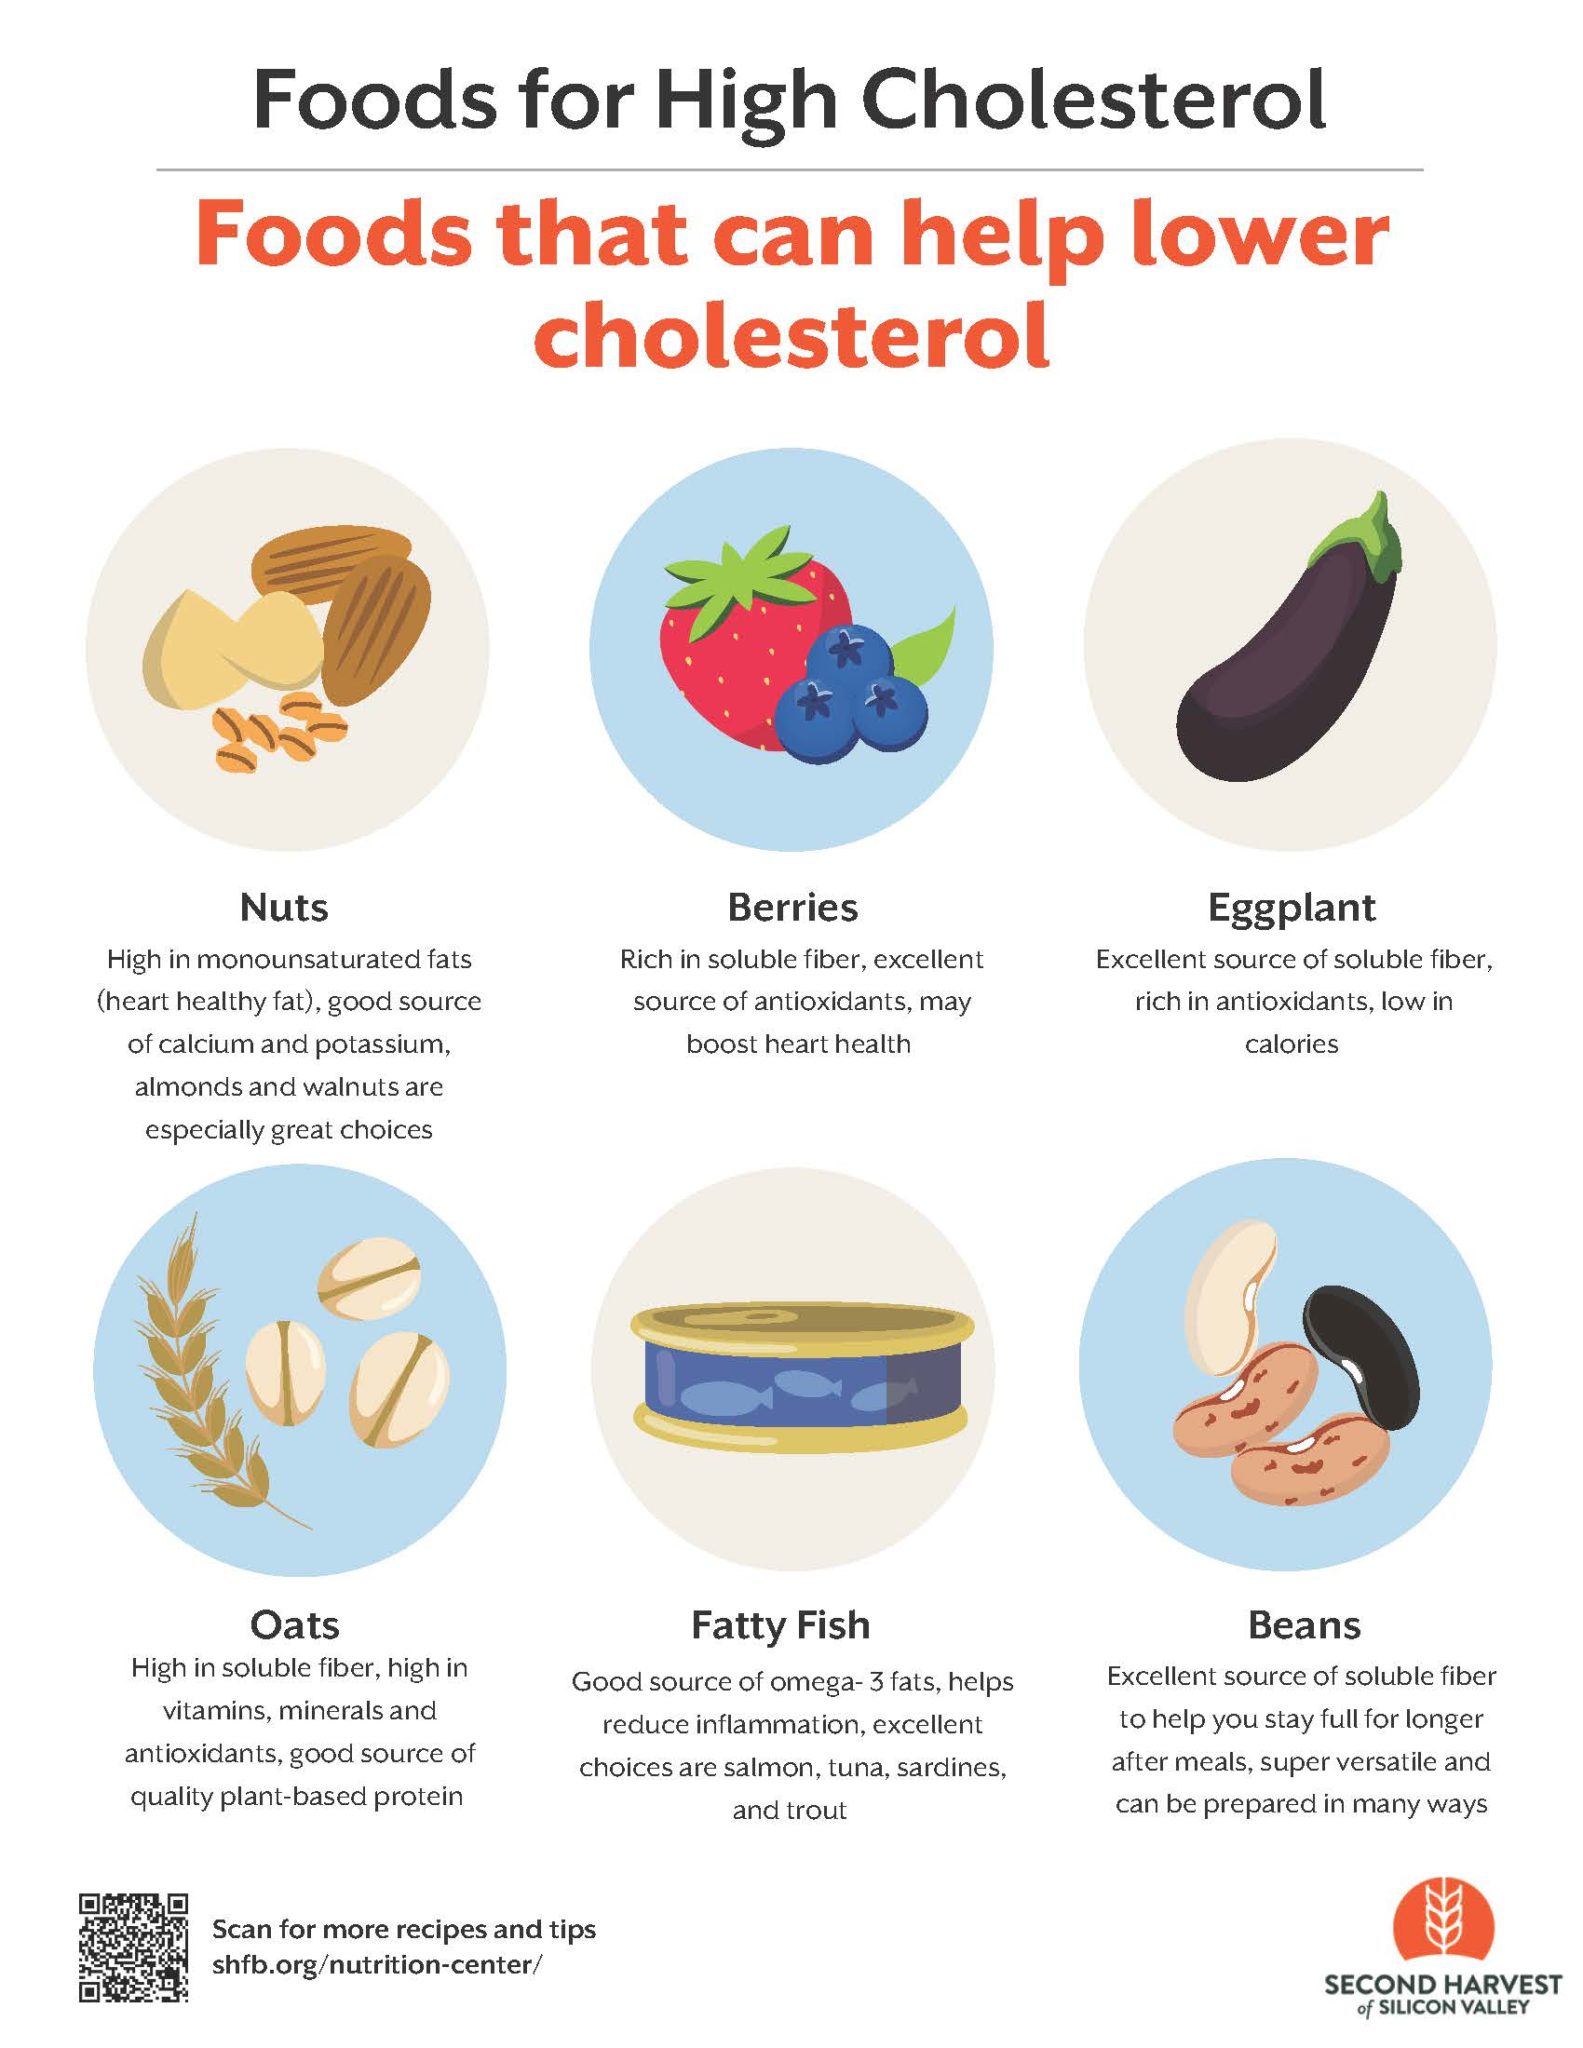 Foods that can help lower cholesterol